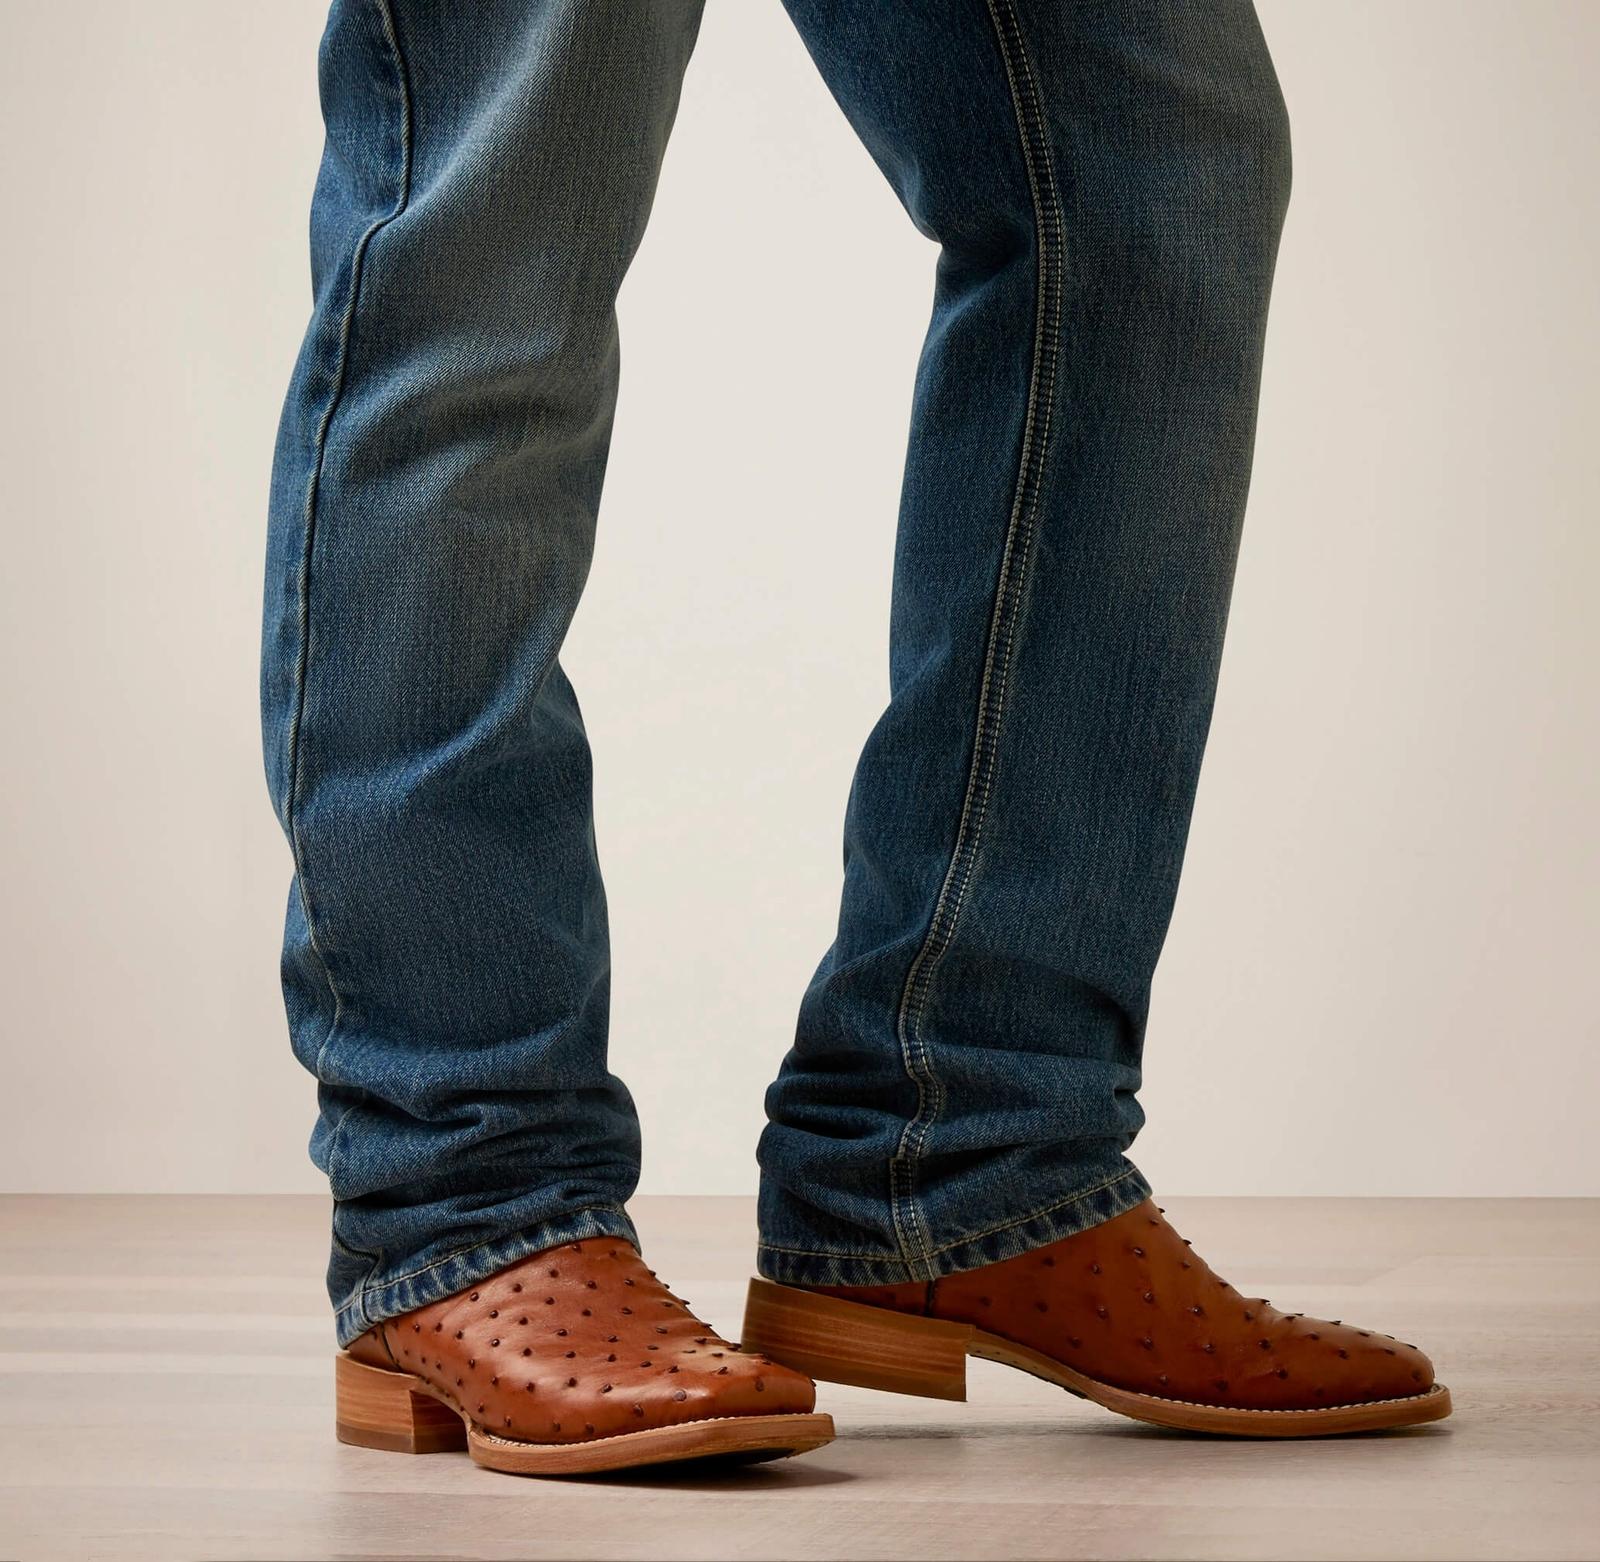 M4 Relaxed Solano Straight Jean